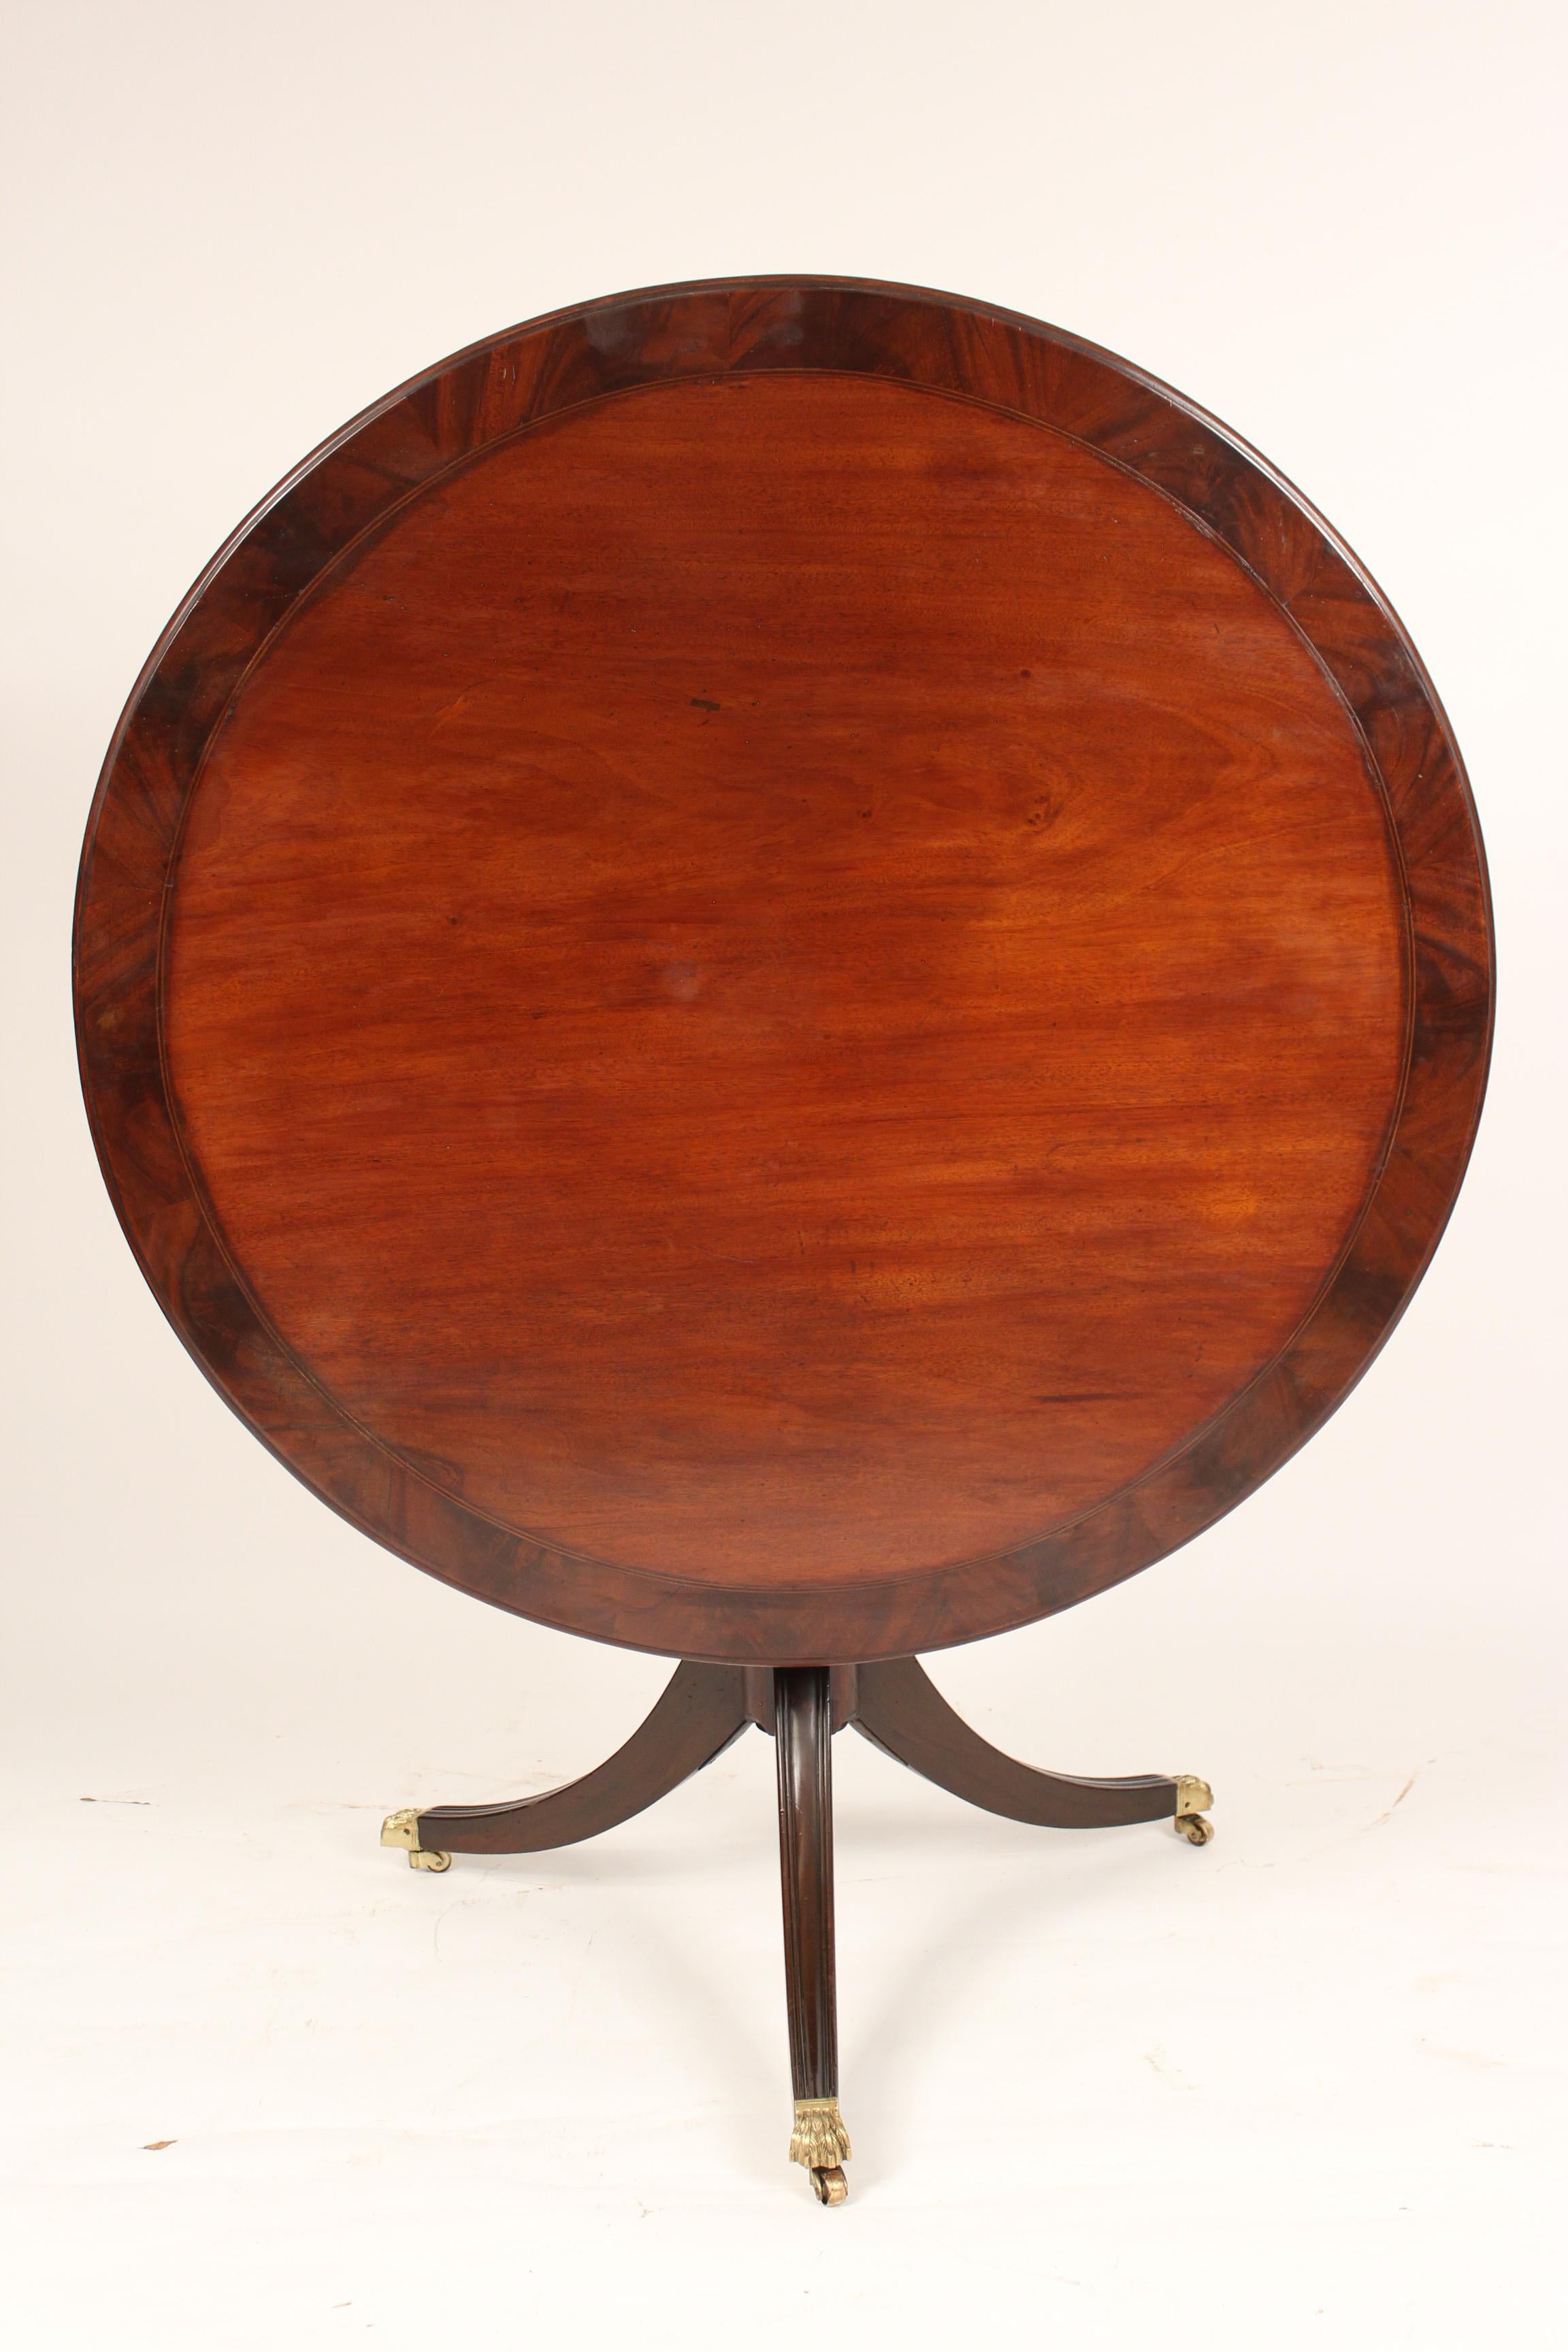 Early 20th Century George III Style Mahogany Games / Center Table